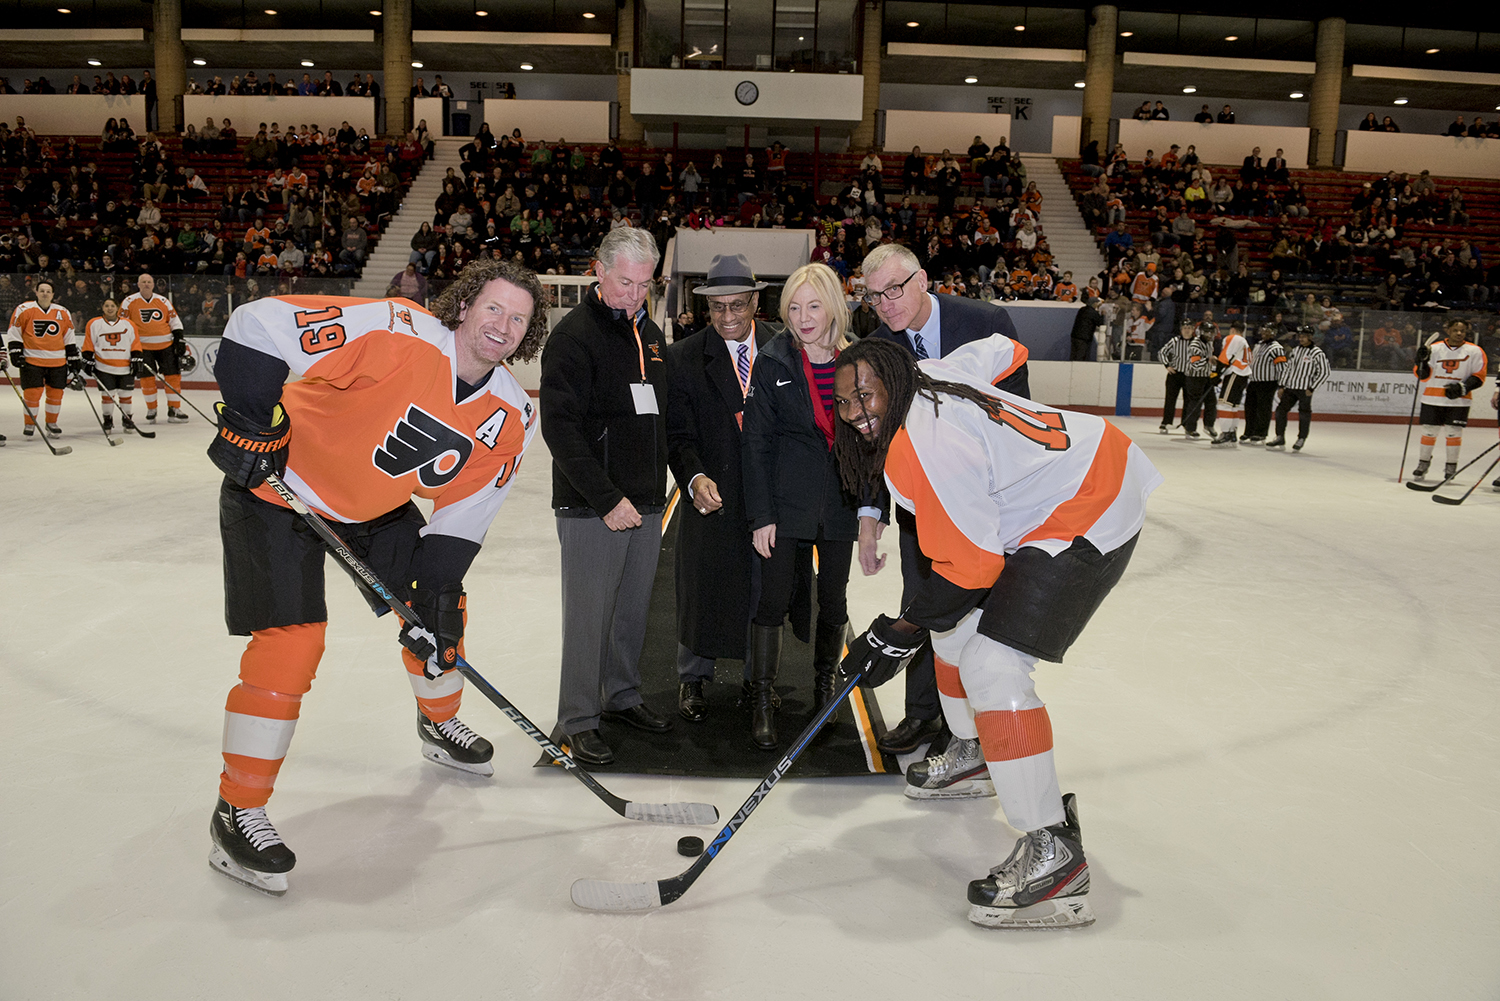 A Flyers alum and a Snider Hockey player pose for a ceremonial puck drop with Dr. Gutmann, Willie O'Ree and Bill Whitmore